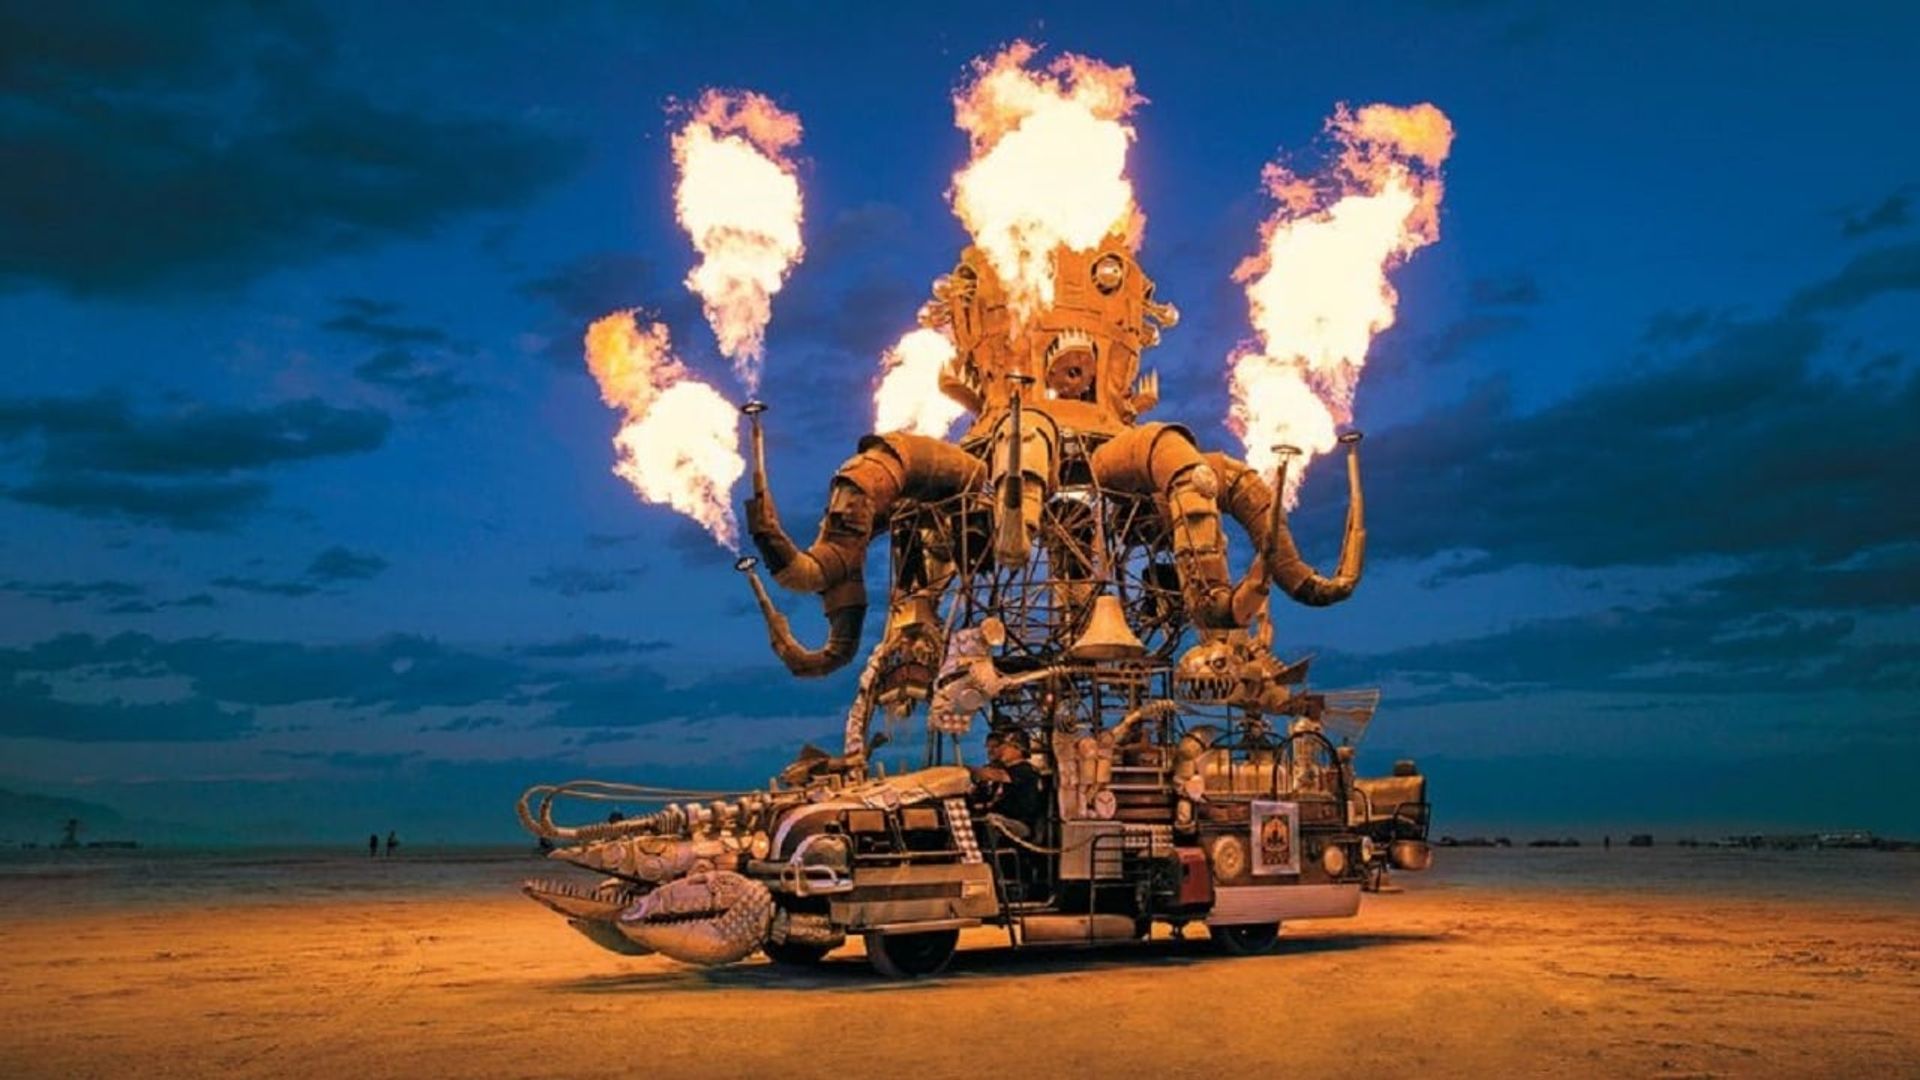 Journey to the Flames: 10 Years of Burning Man background